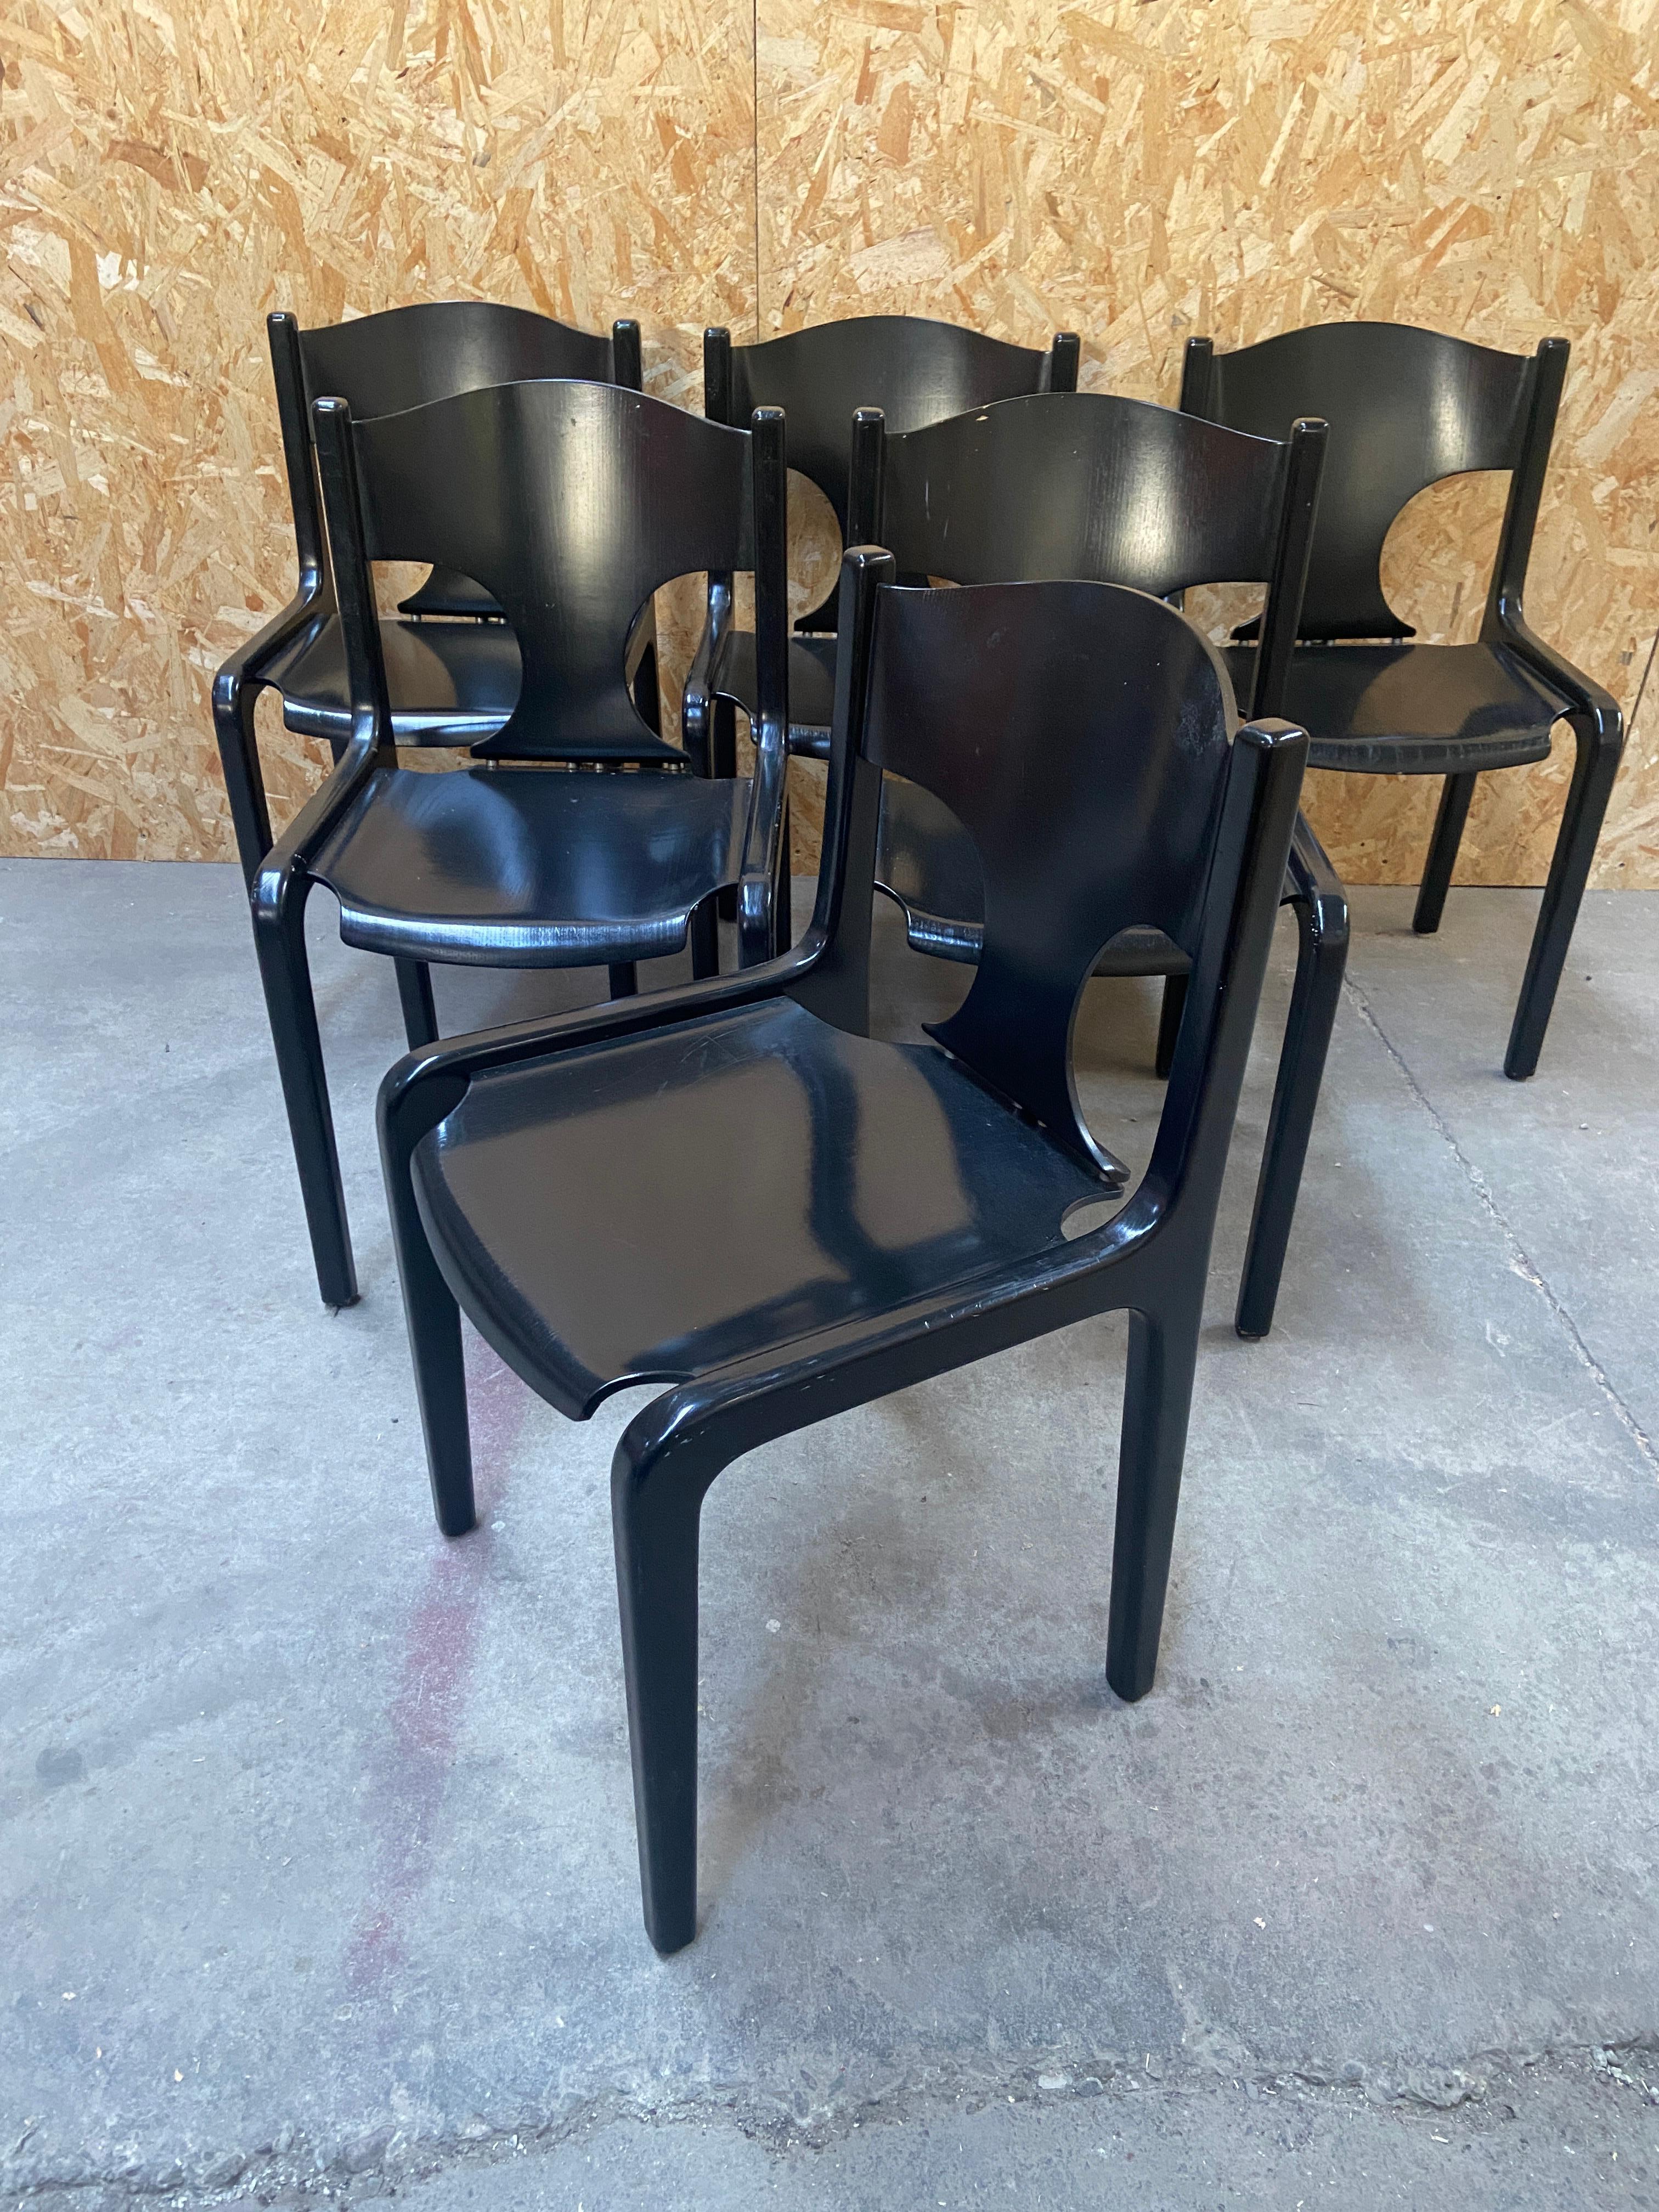 Beautiful set of six chairs designed by architect Augusto Savini for the manufacture Giuseppe Pozzi and sons at the end of 1960s. The chairs were mass produced and were first presented at Pozzi's Gallerie Lafayette in 1968. These wonderful chairs